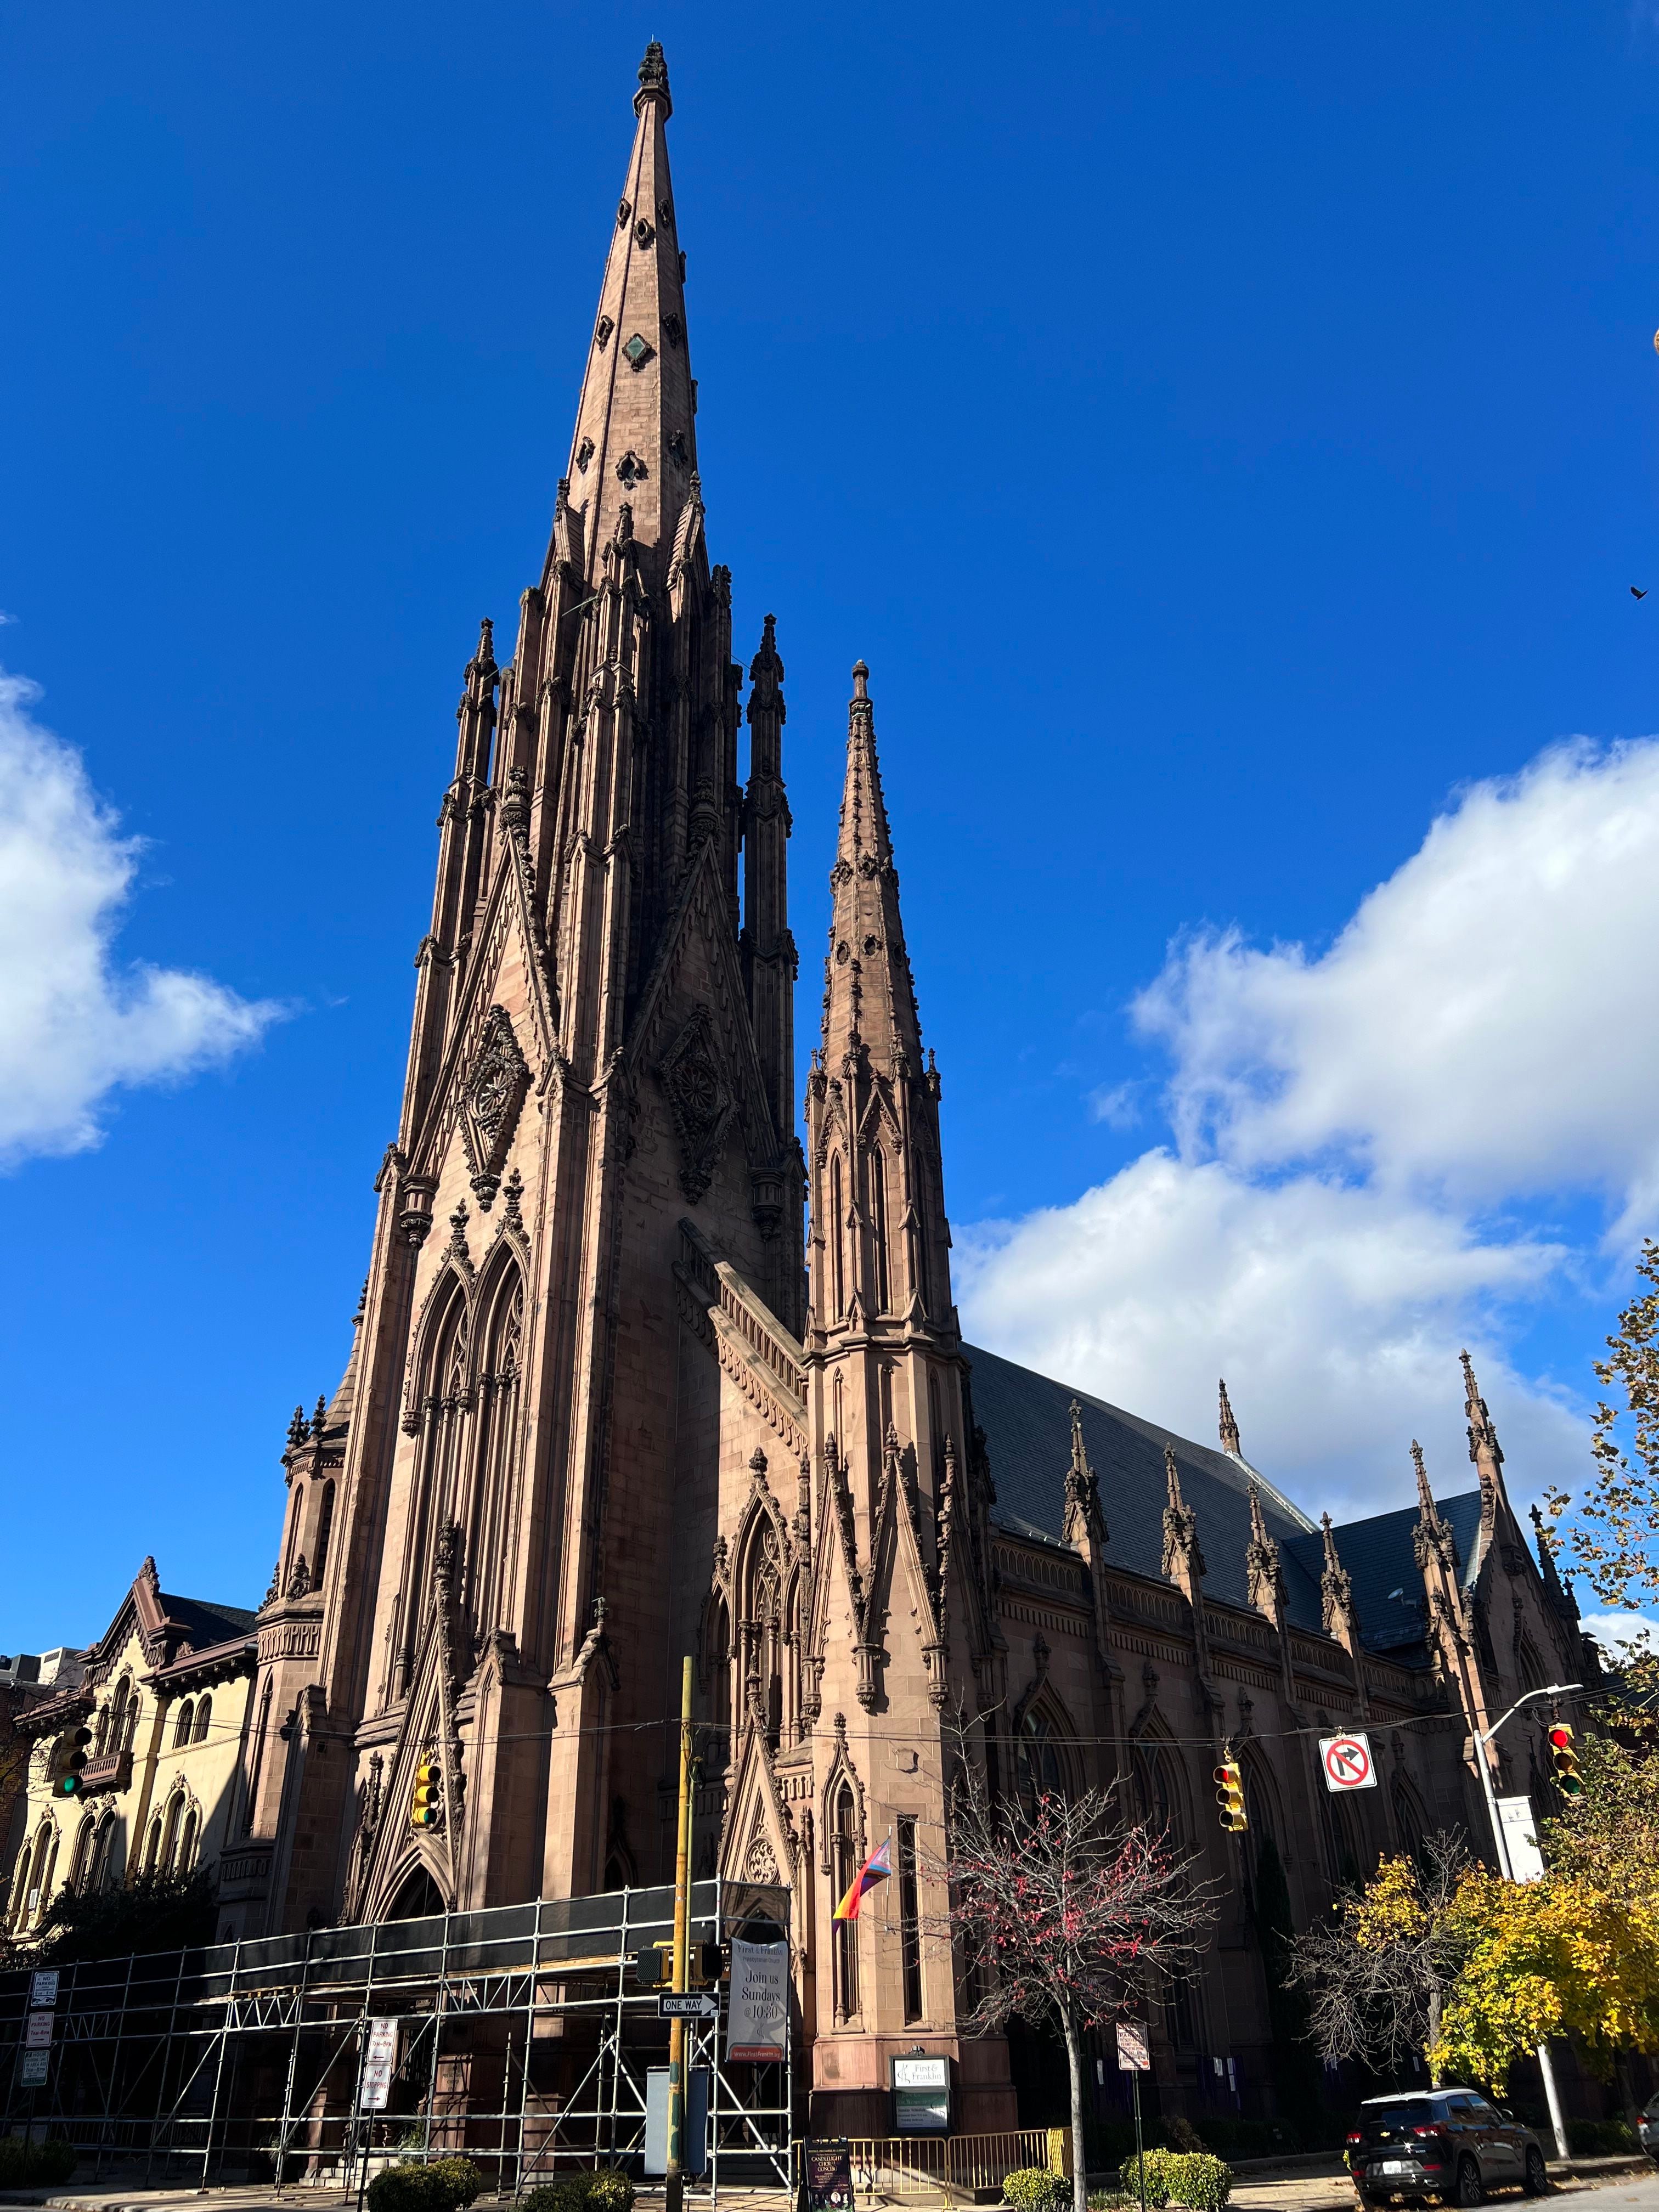 Baltimore Building of the Week: Victorian Gothic Churches